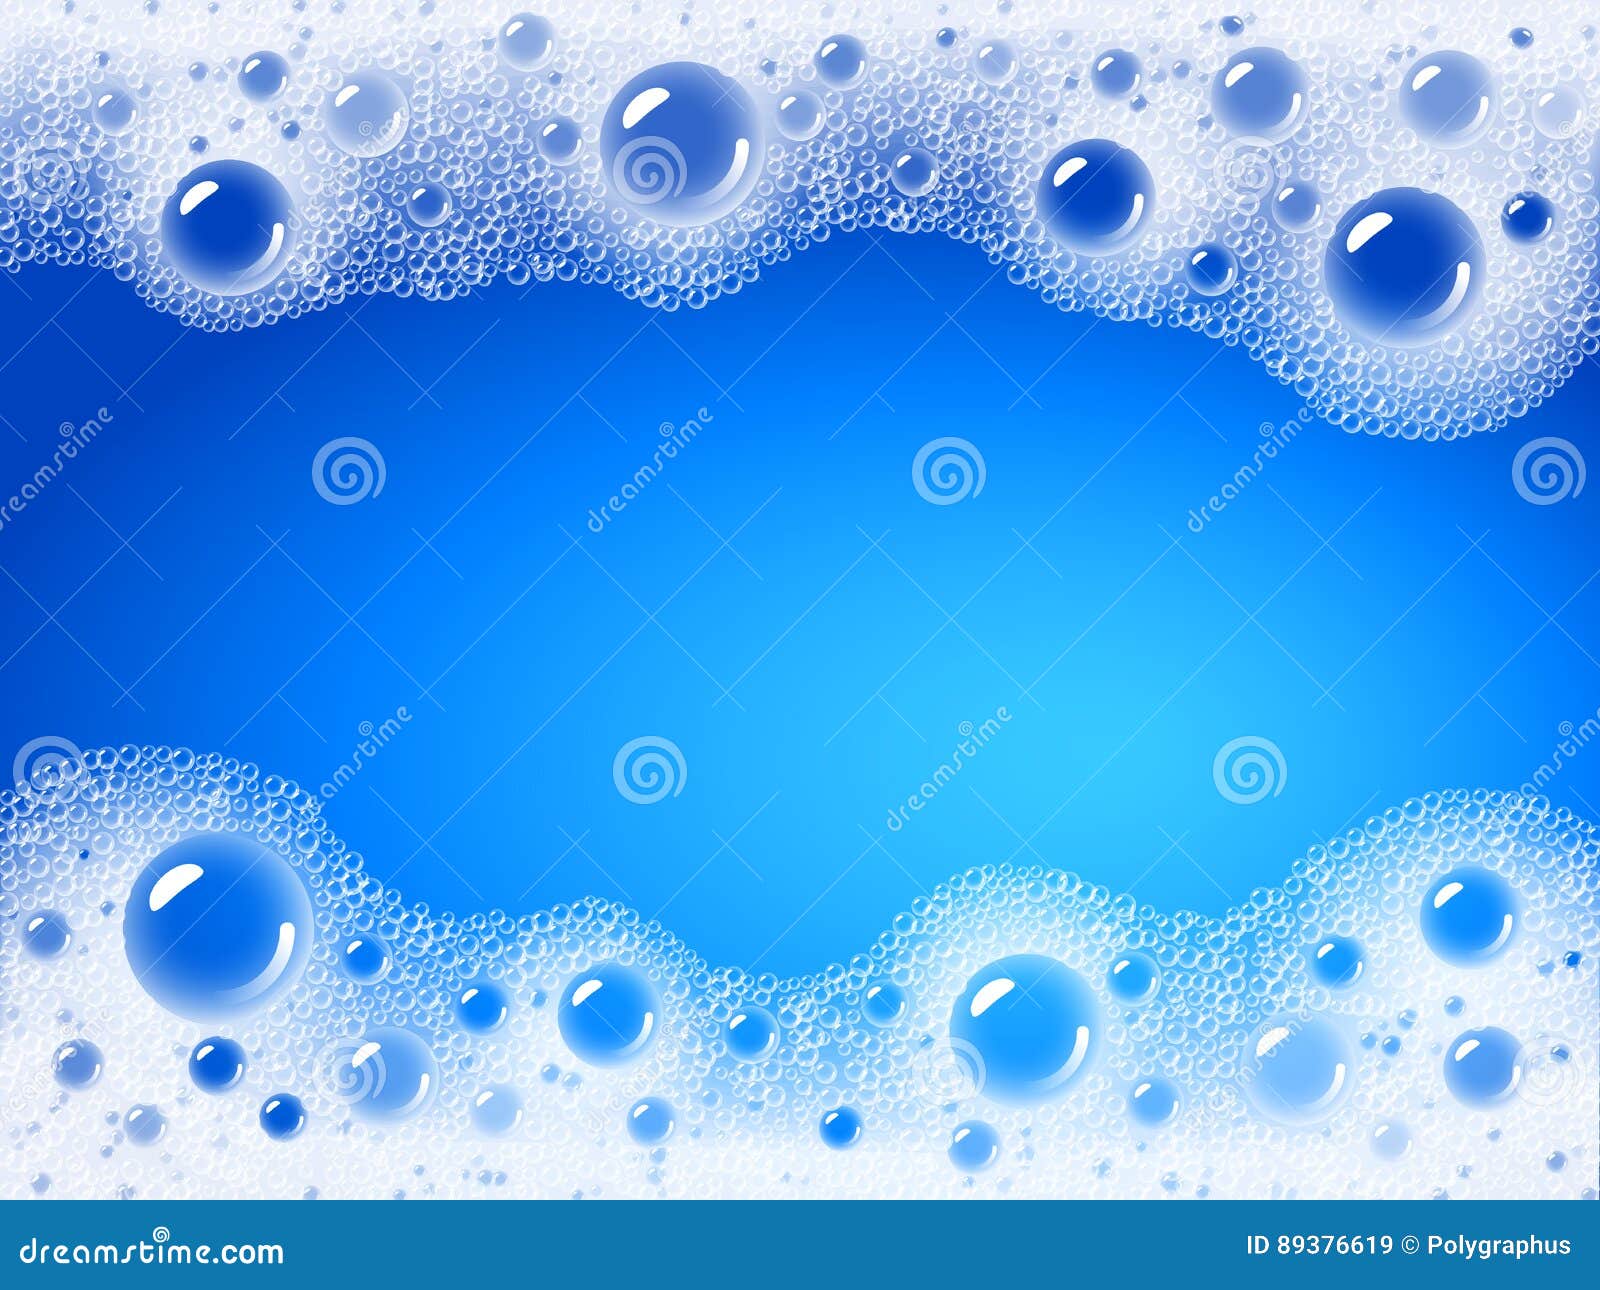 soap foam overlying on the background of a blue water color